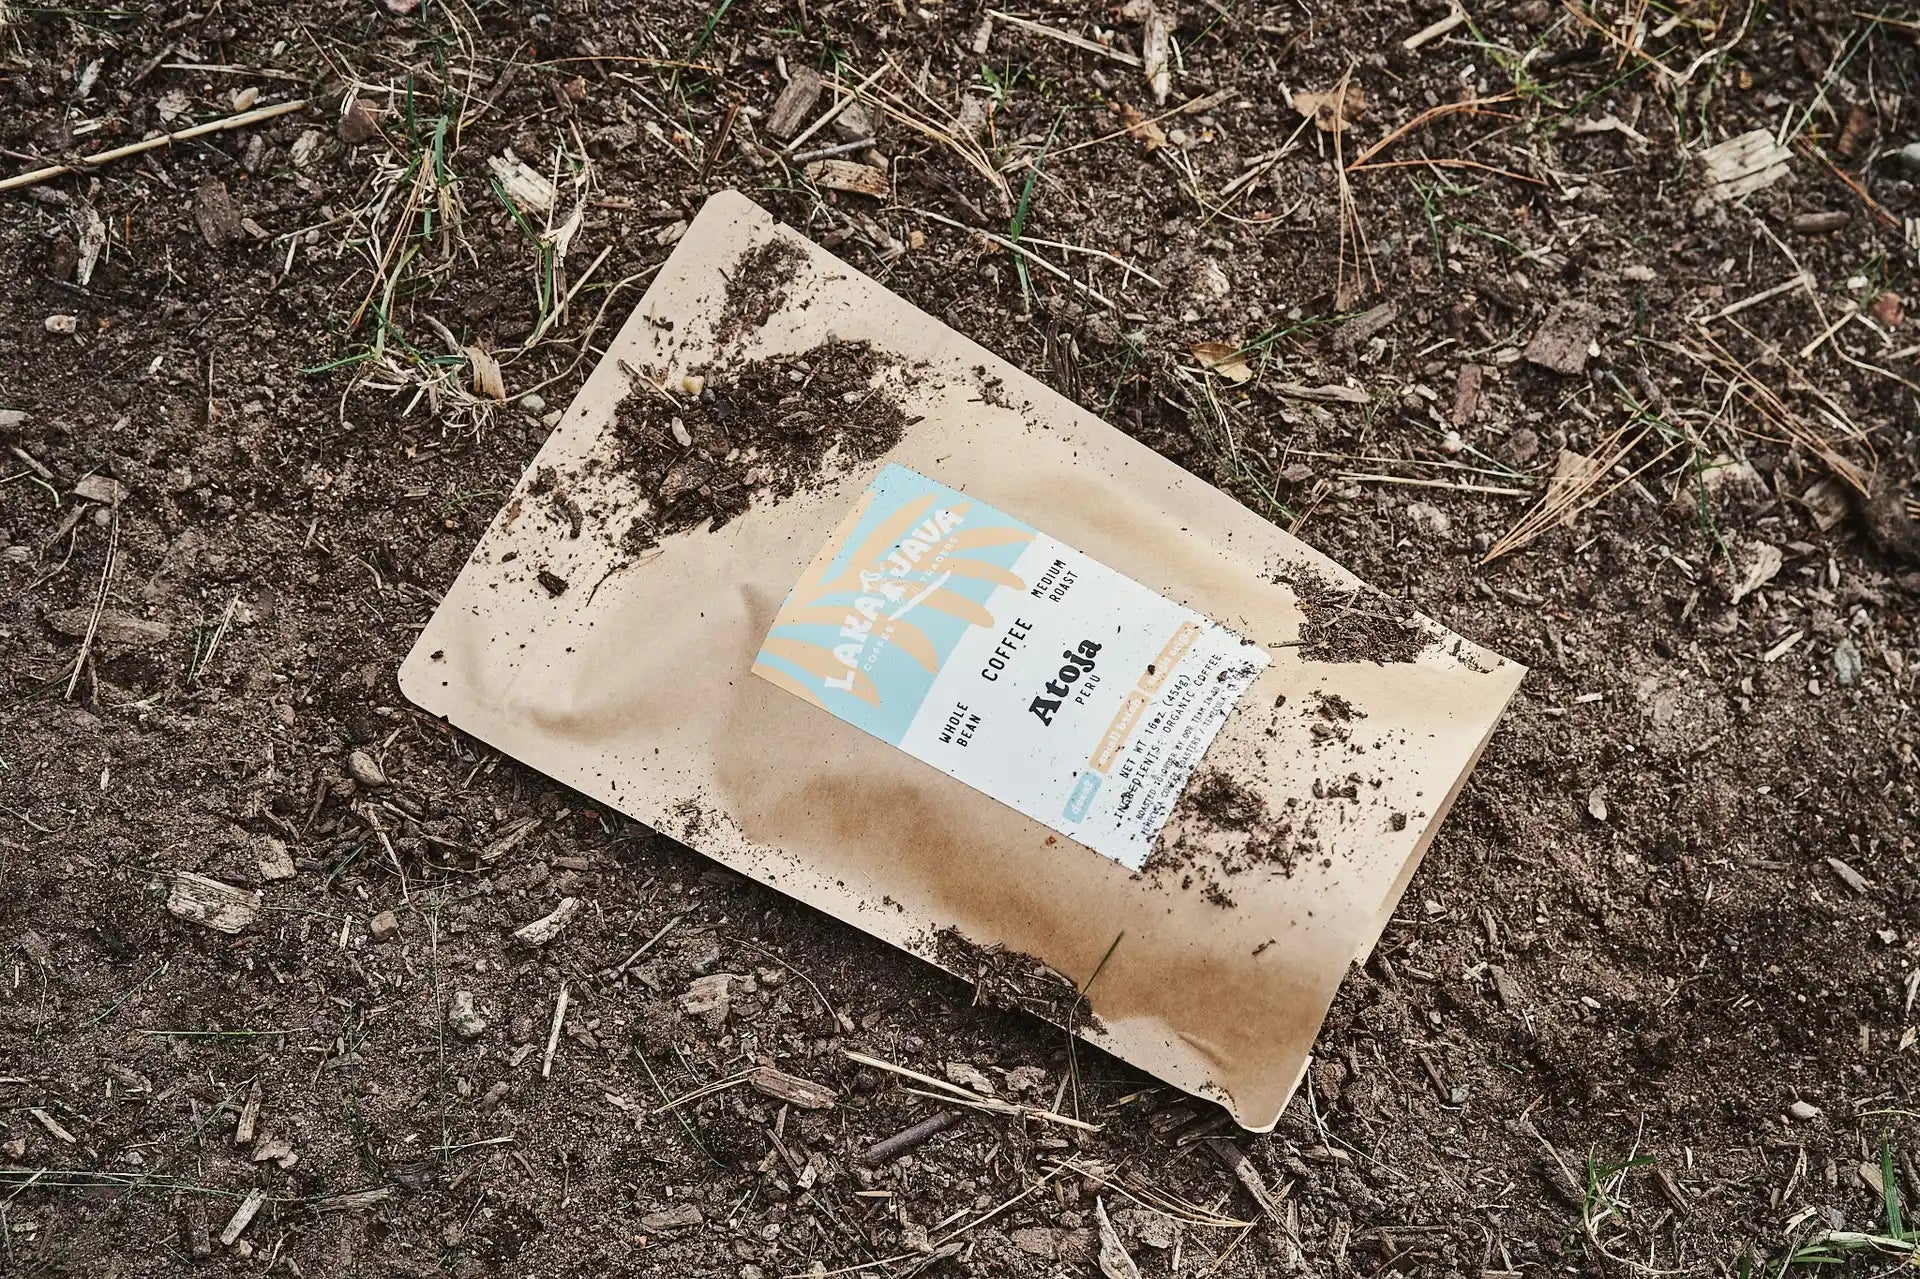 A bag of Laka Java Atoja decaf coffee beans on the ground with dirt on it.